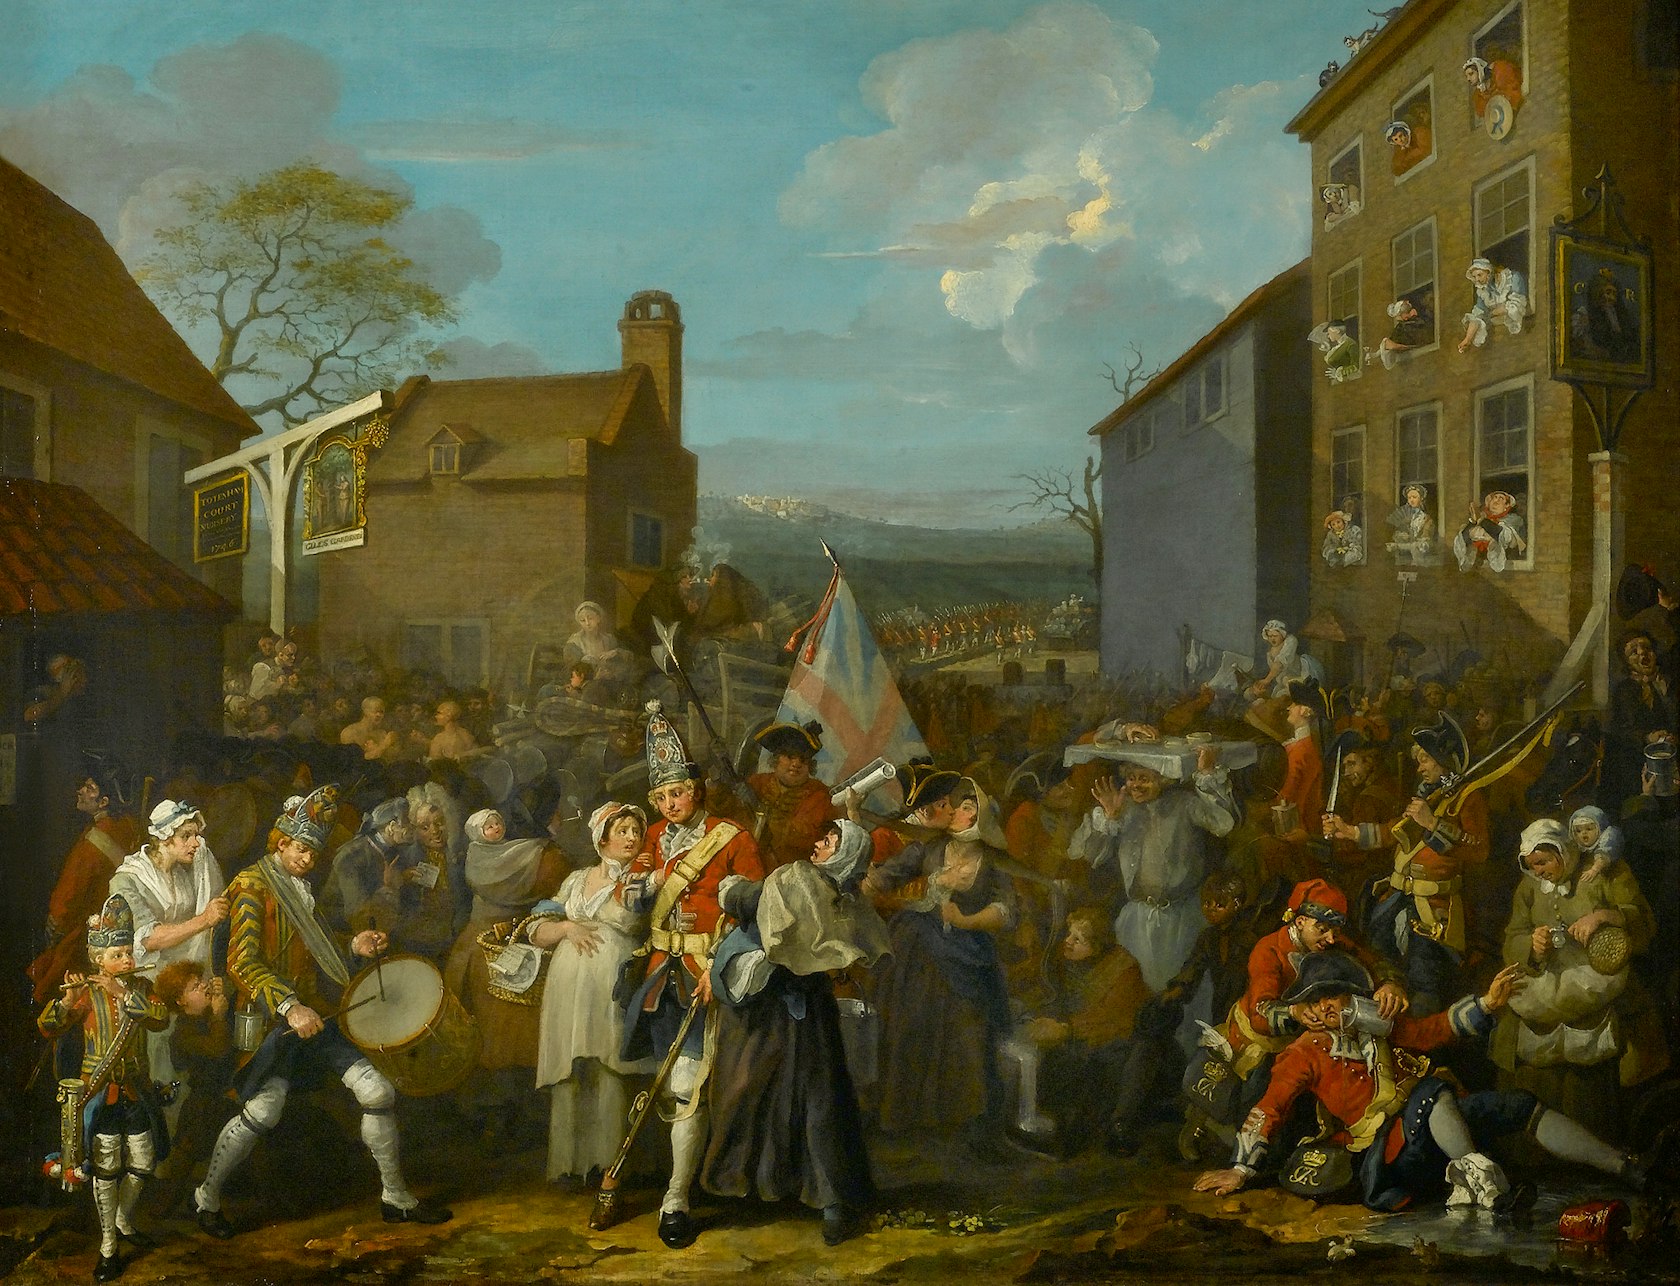 William Hogarth, The March of the Guards to Finchley, 1749-1750, oil on canvas (c) The Foundling Museum, London – medium res